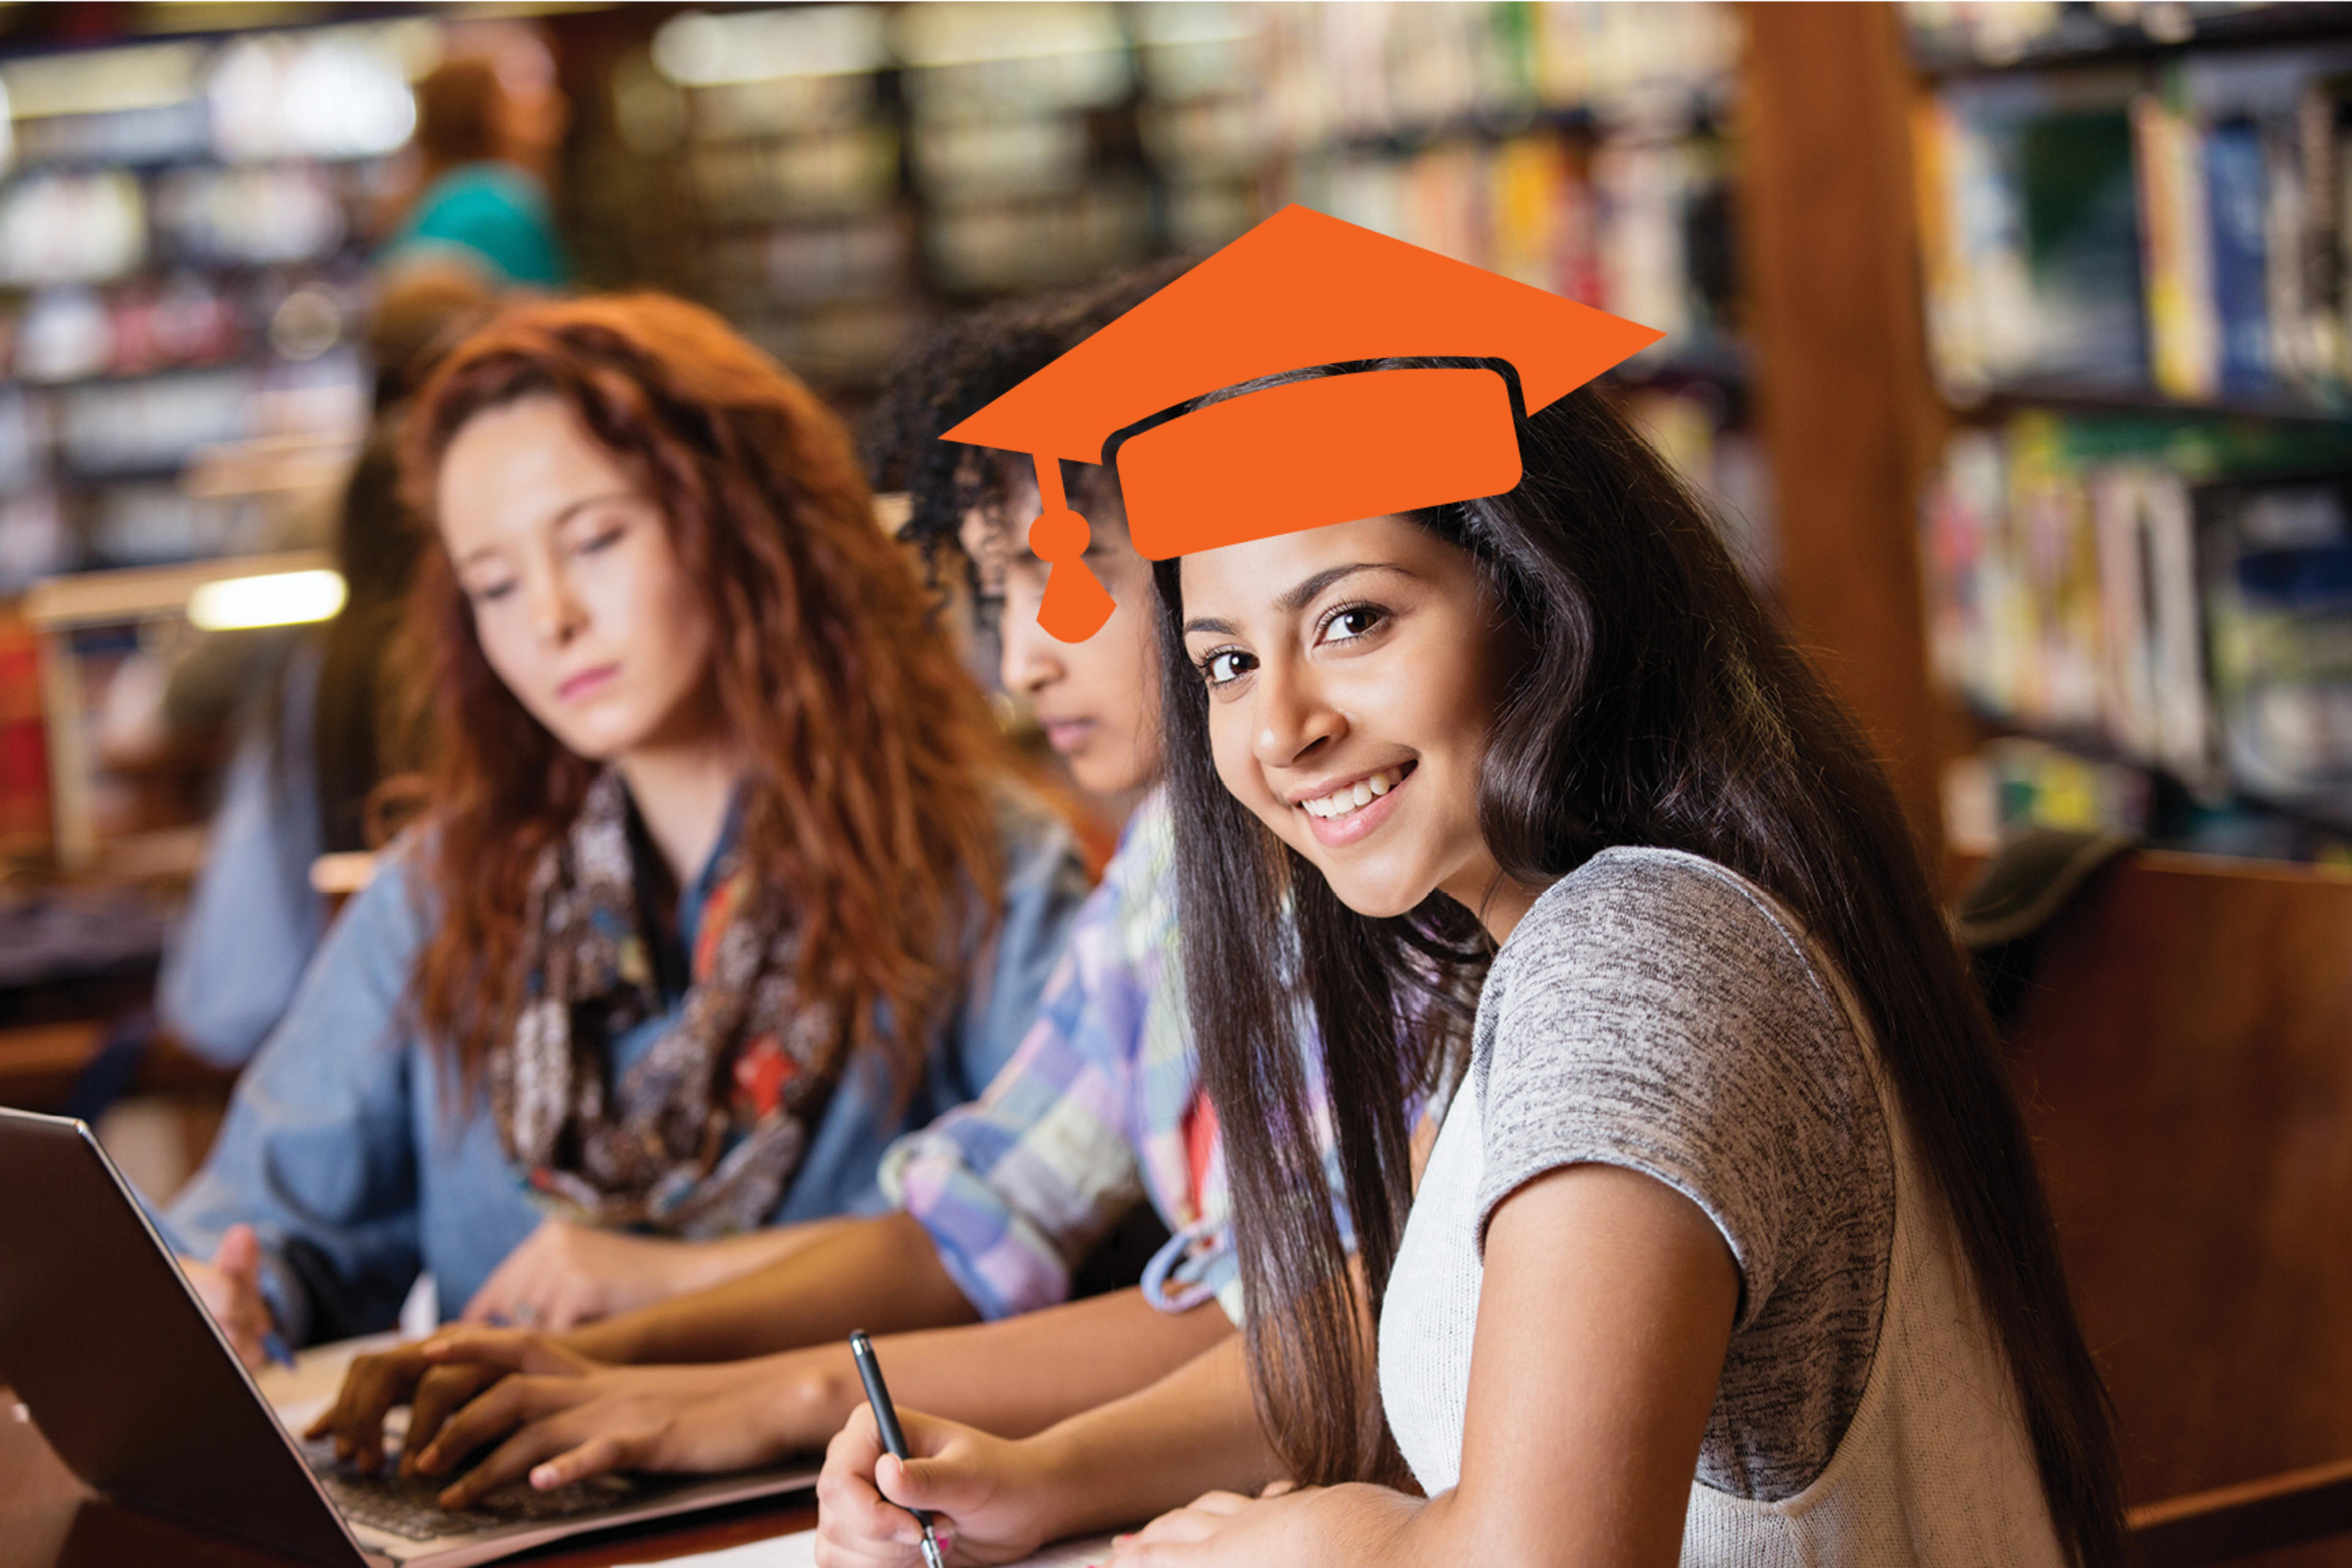 3 girls sitting at a computer, on looking forward with a graphic illustration of a mortarboard hat overlayed on her head.